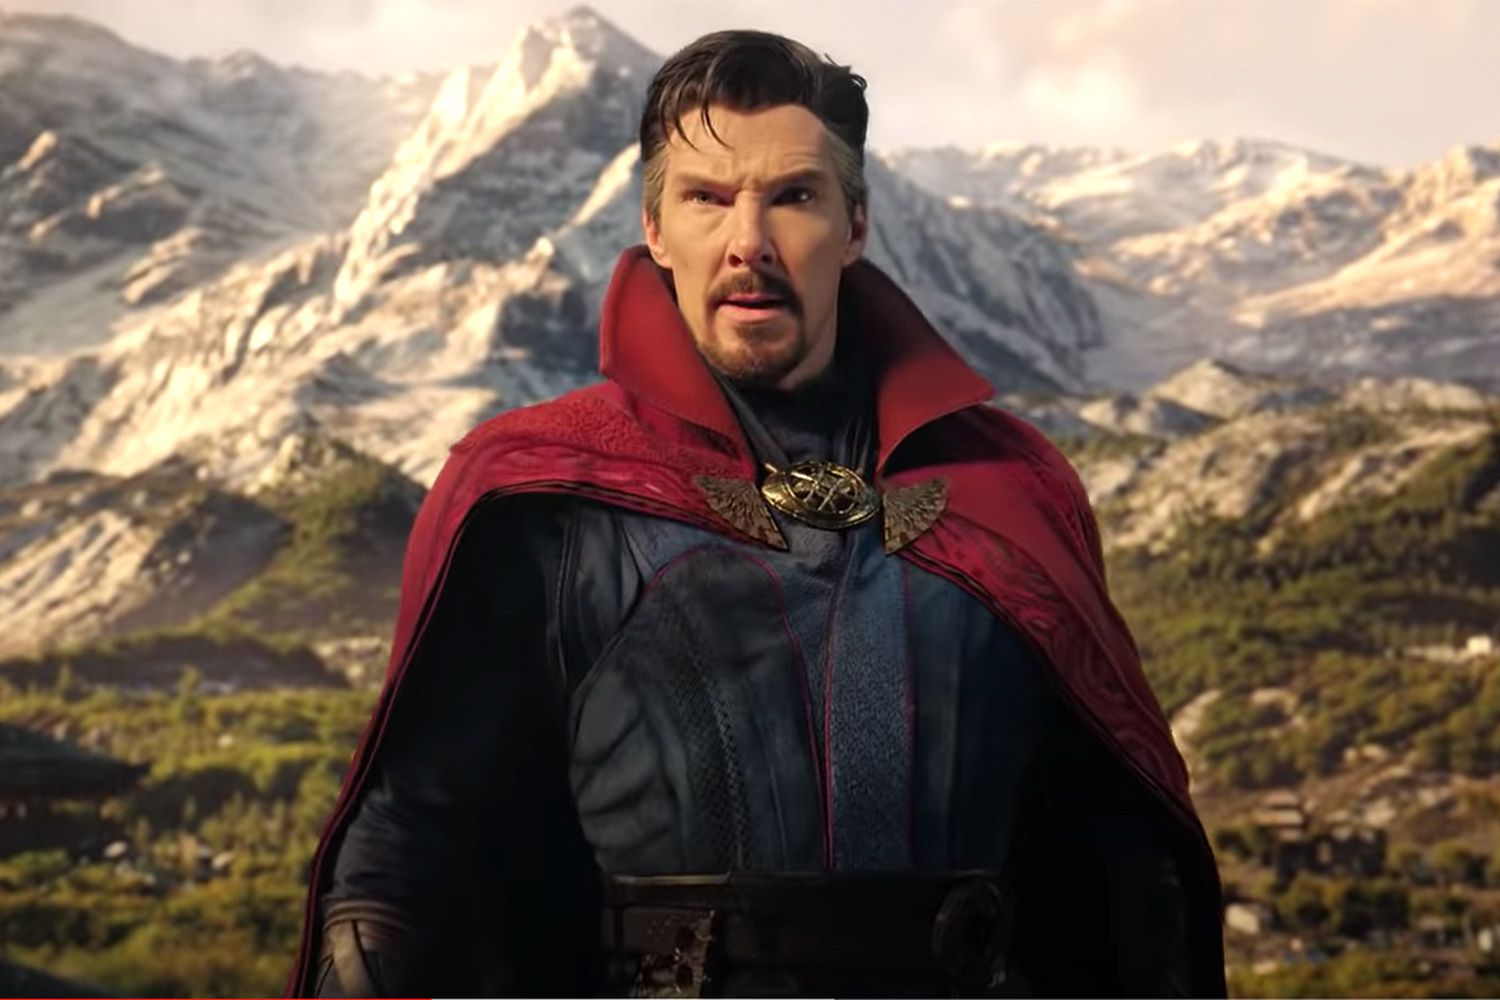 Disney+ will likely stream Doctor Strange 2 after it hits theaters on these dates